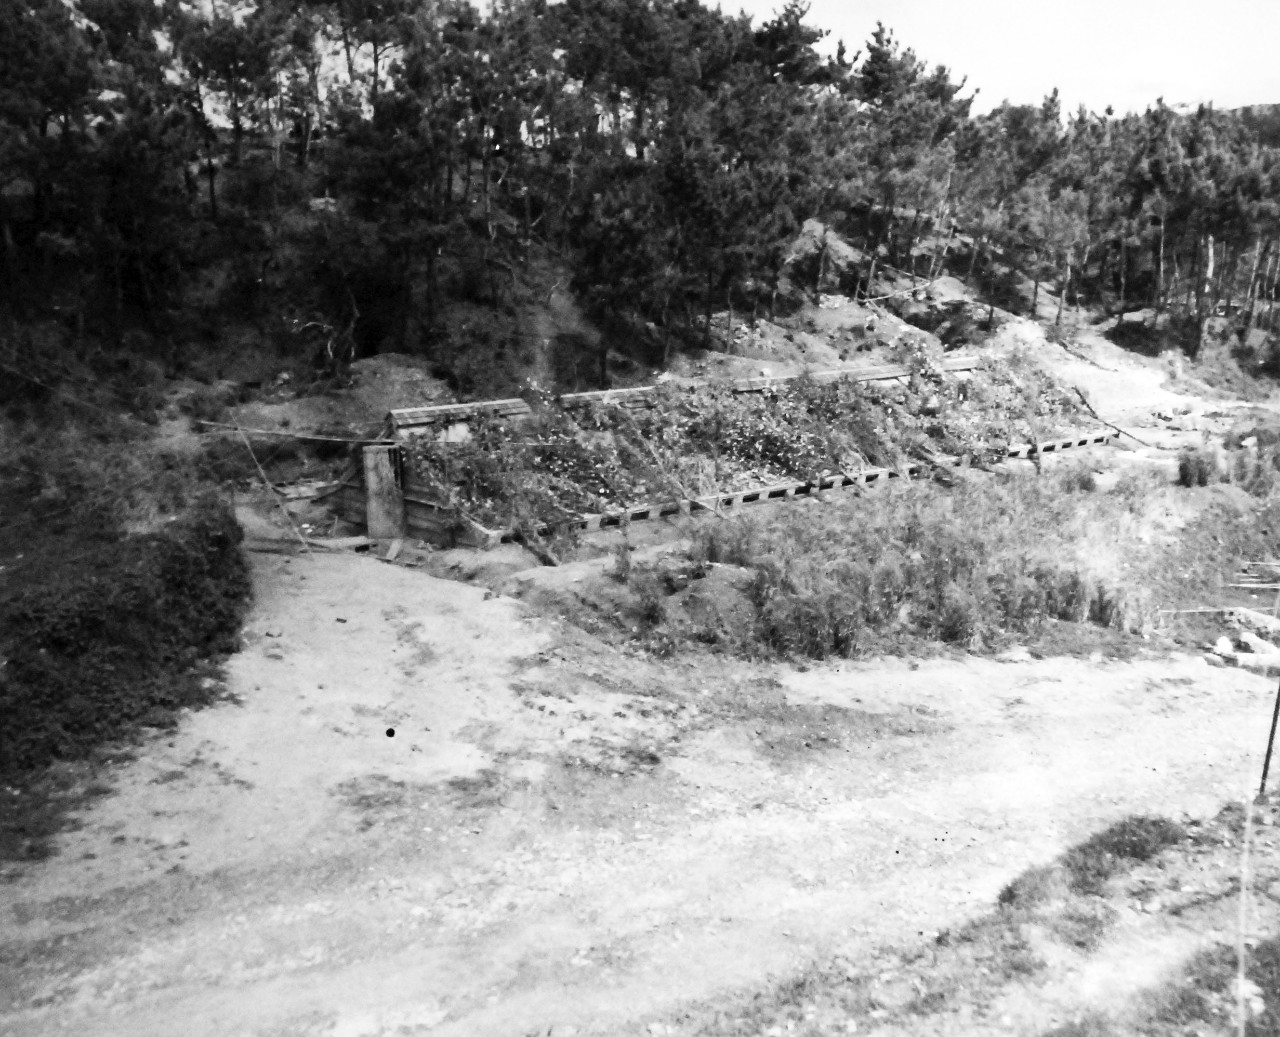 80-G-331537:  Okinawa Campaign, April-June 1945.  Camouflaged Japanese barracks for enlisted personnel, Okinawa, Ryukyu Islands, April 3, 1945.   Official U.S. Navy Photograph, now in the collection of the National Archives.  (2013/08/21).  